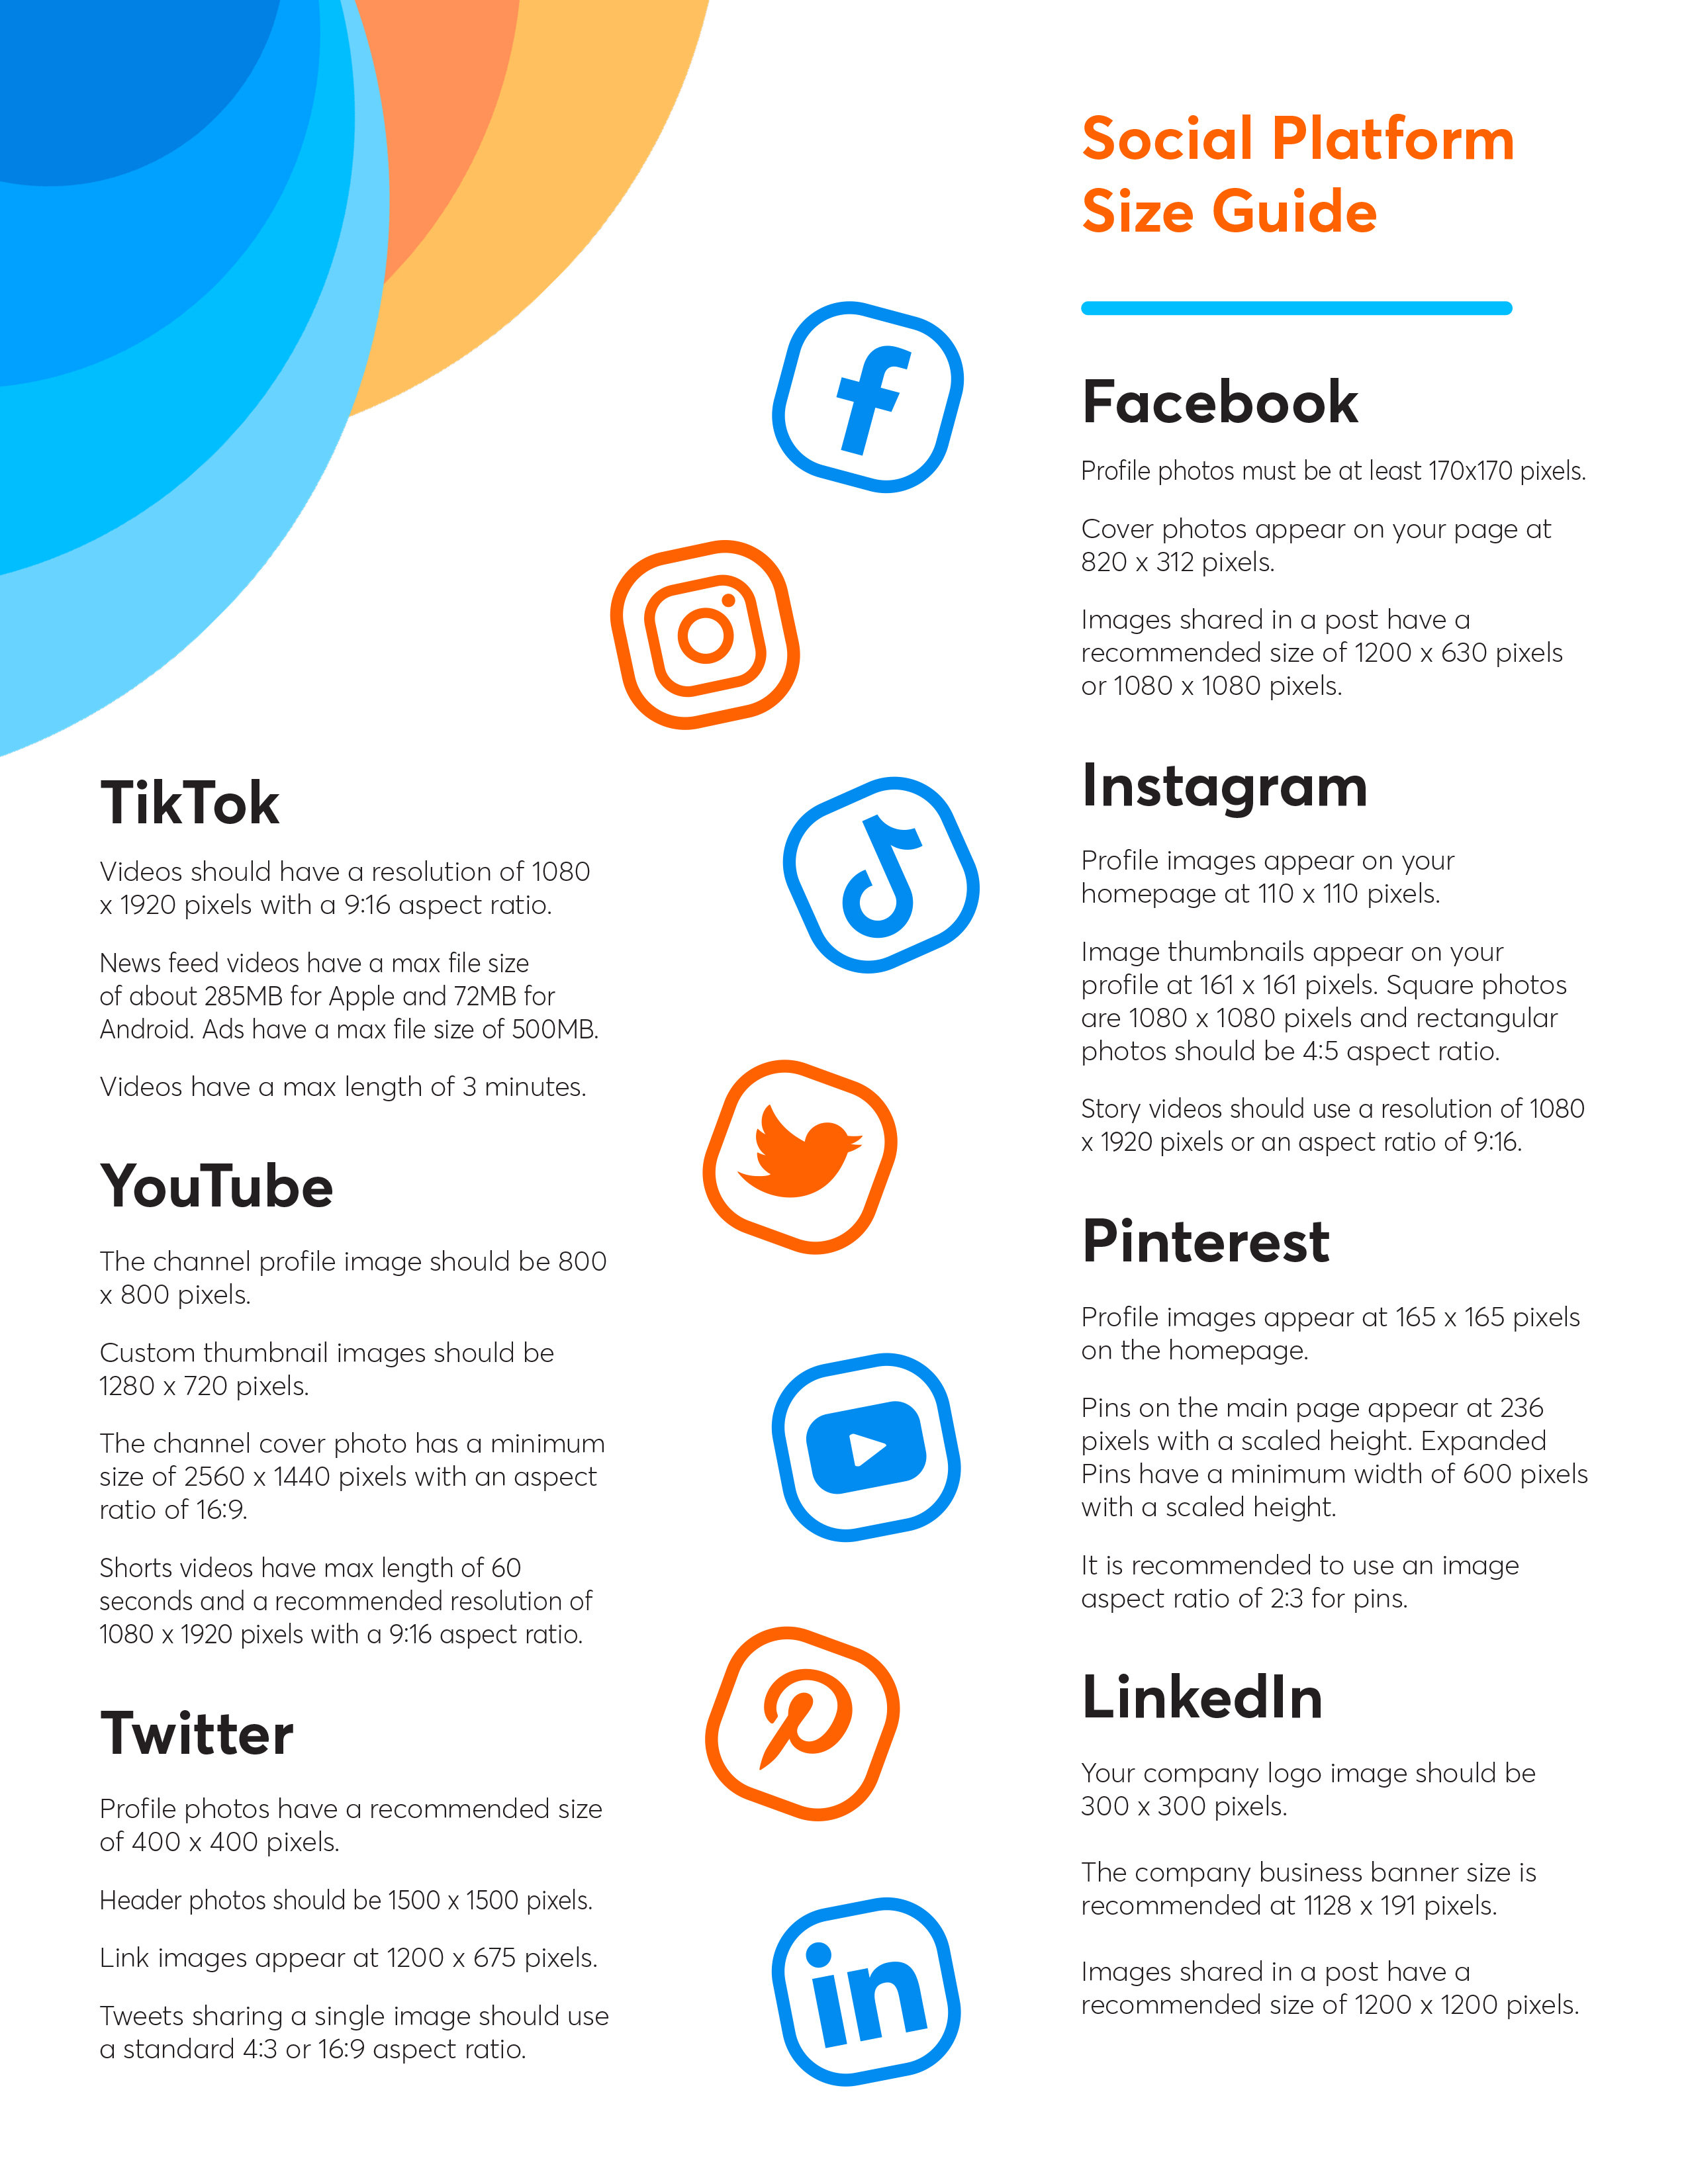 Instagram Profile Picture Full Size (+ What Else to Know) - ShareThis